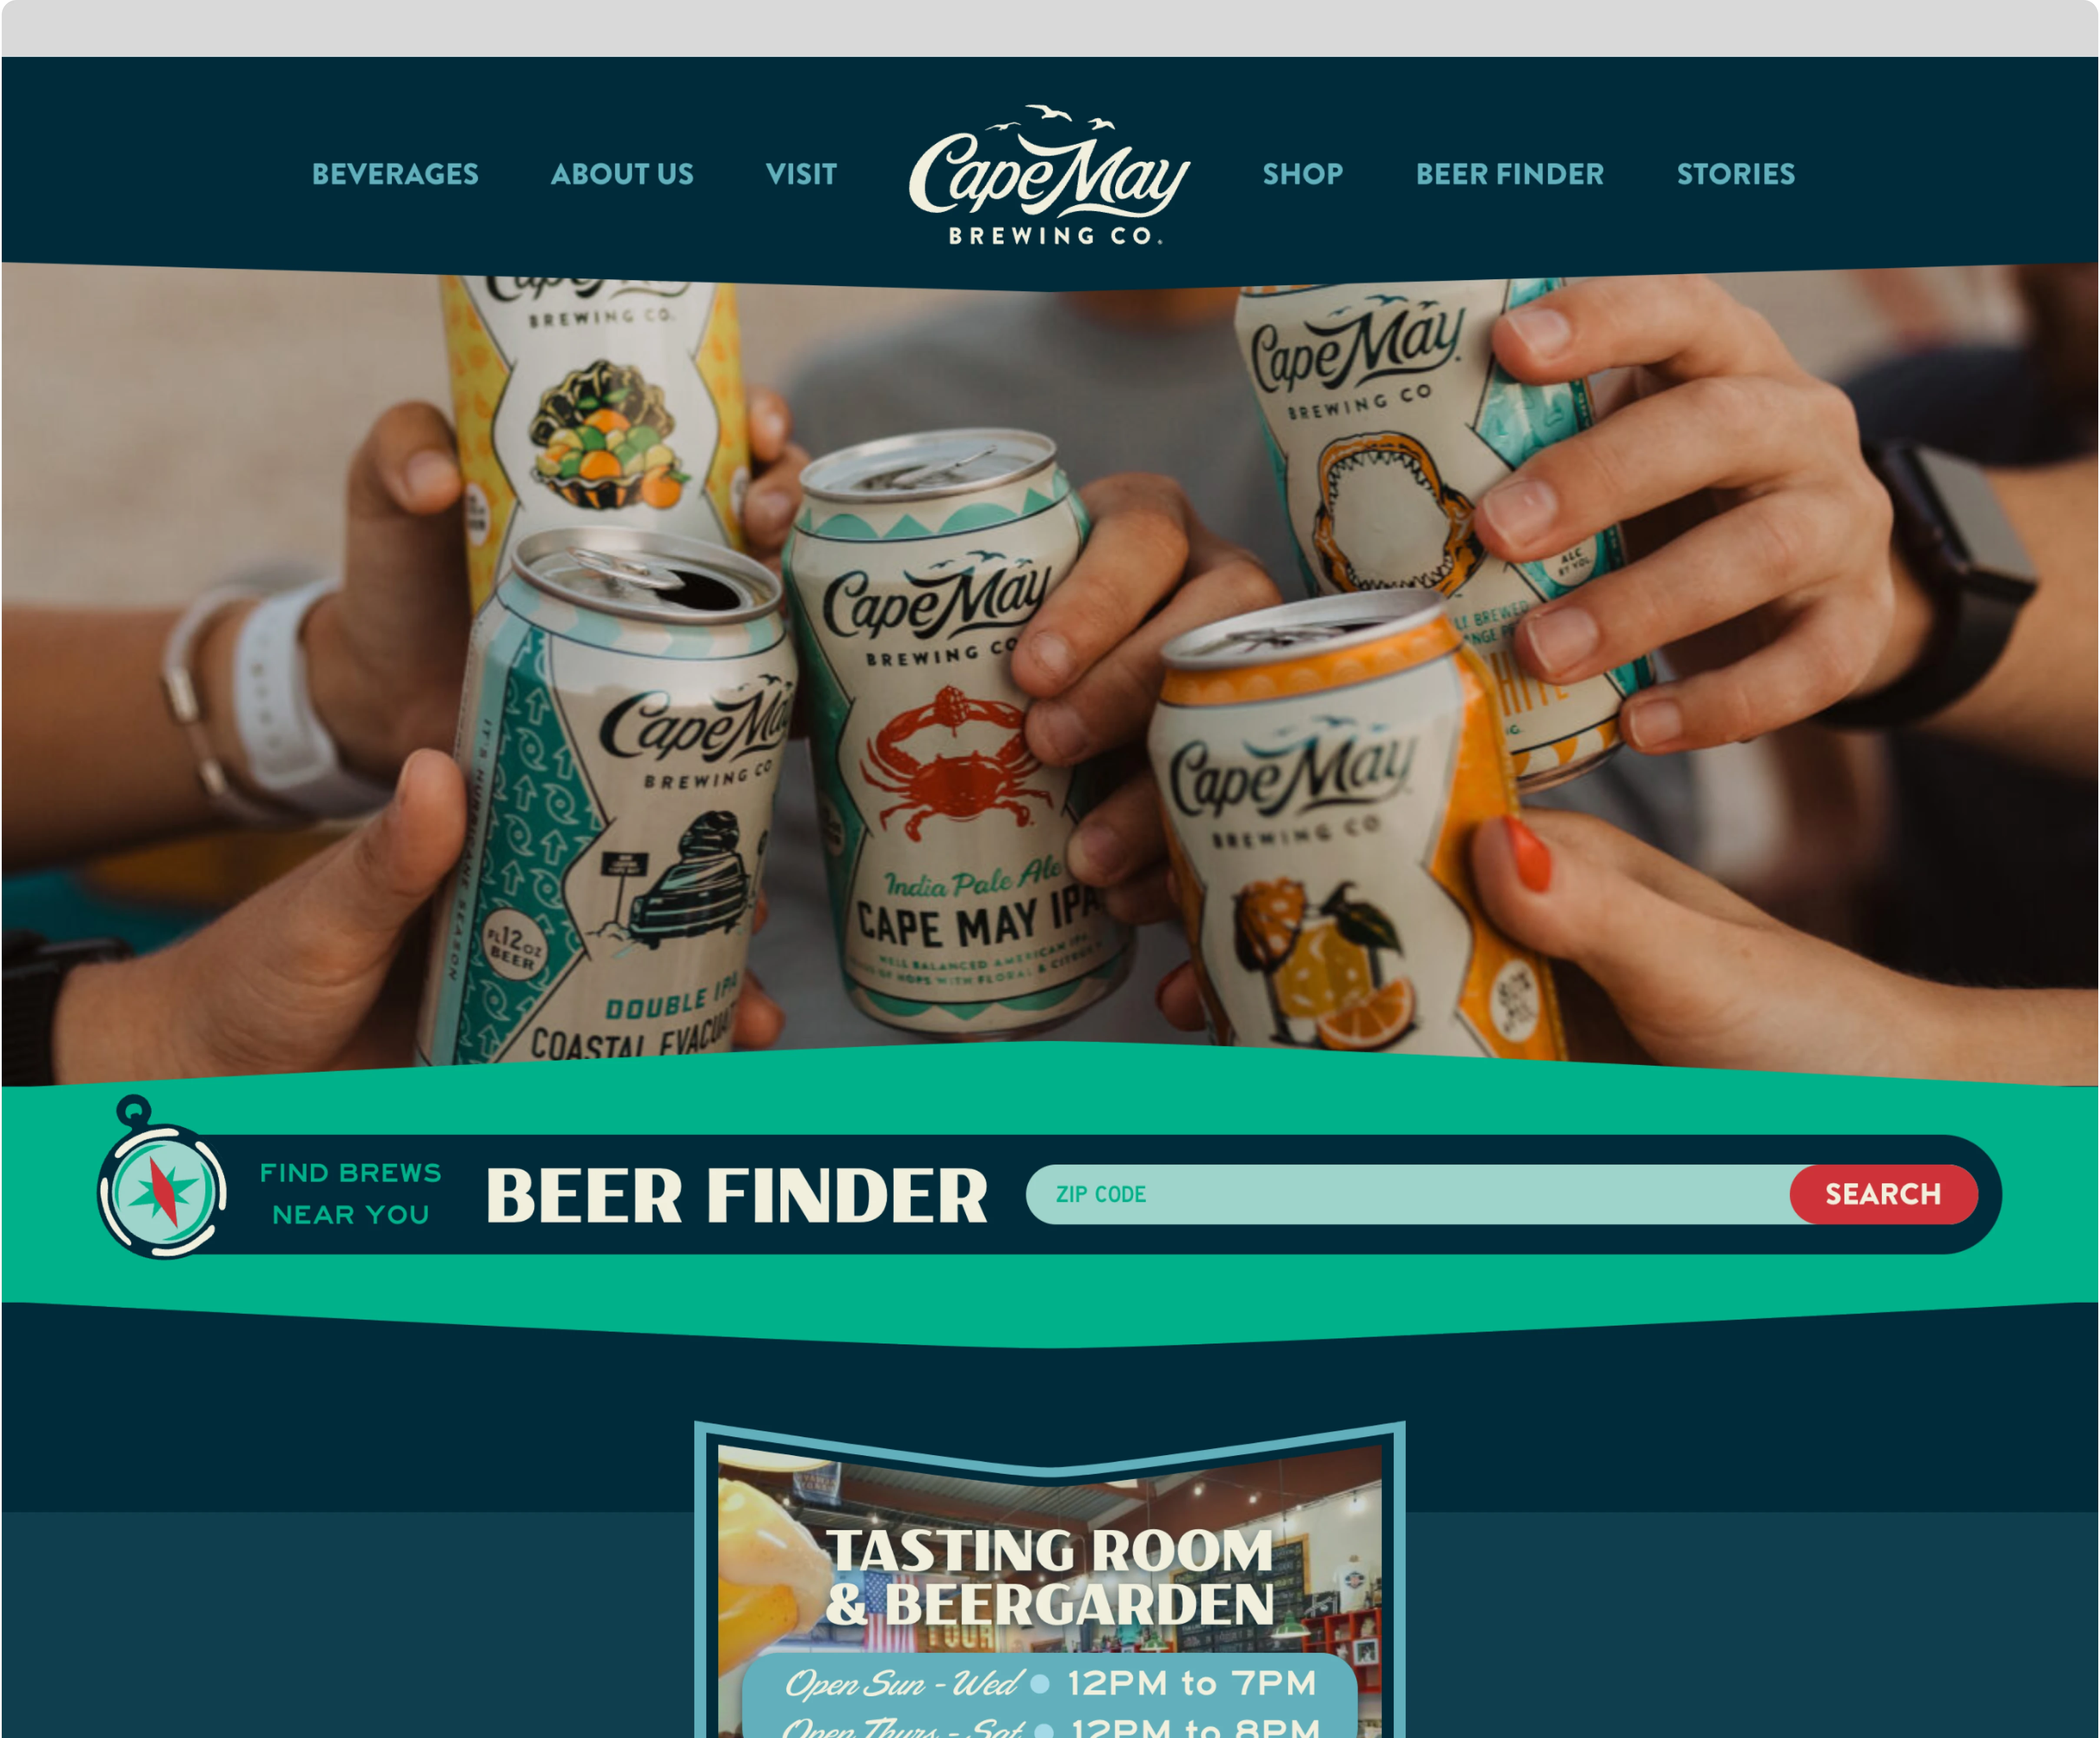 The Cape May Brewing Company homepage